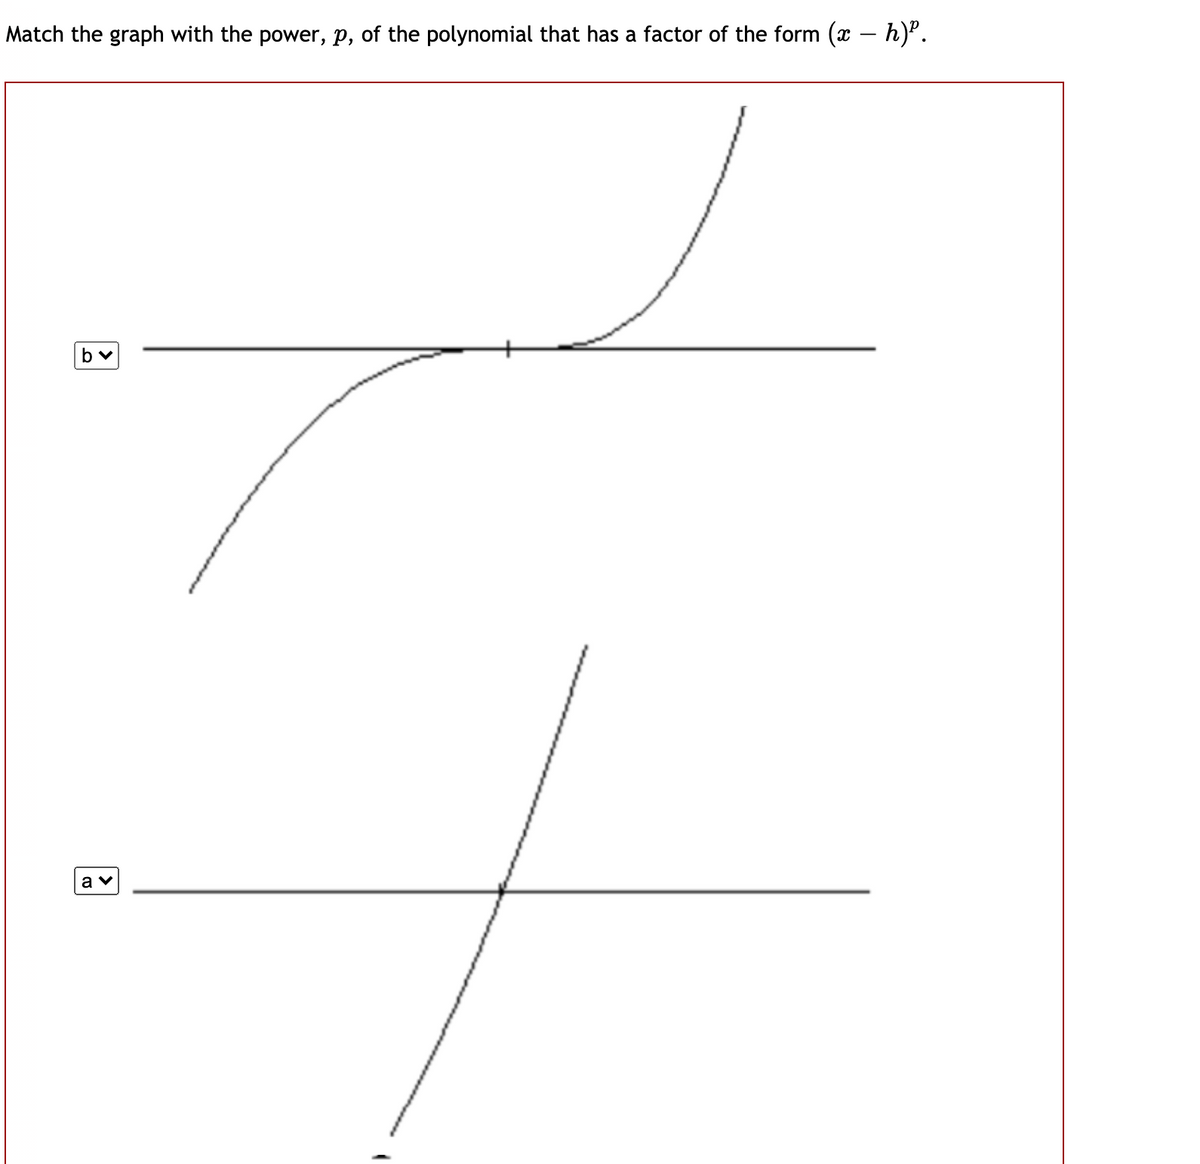 Match the graph with the power, p, of the polynomial that has a factor of the form (x – h)".
-
a v
